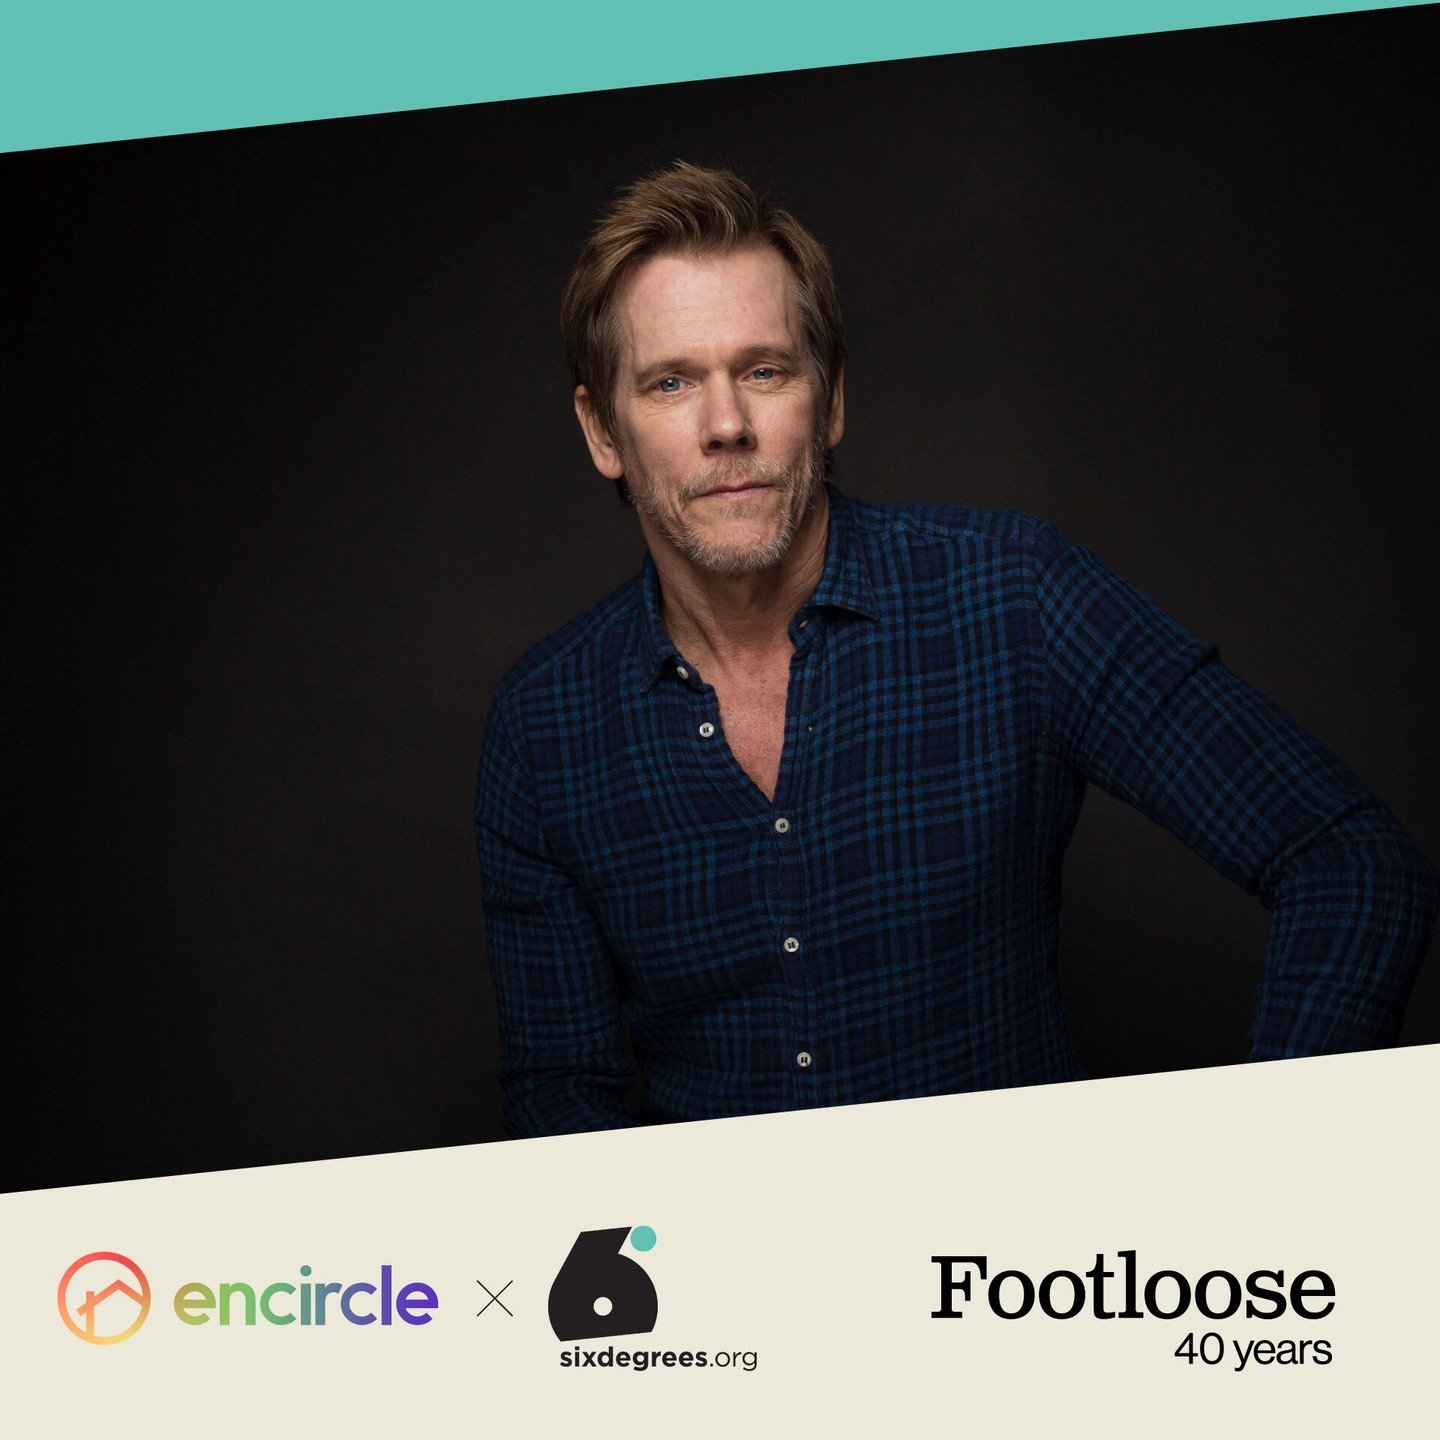 🎉Encircle is honored to partner with @kevinbacon and @sixdegreesofkb for the 40th anniversary of Footloose tomorrow in Payson, Utah💃 

As part of the celebration, Encircle, Six Degrees, along with @centro_ut, @spy_hop, and @foodandcareut, will work